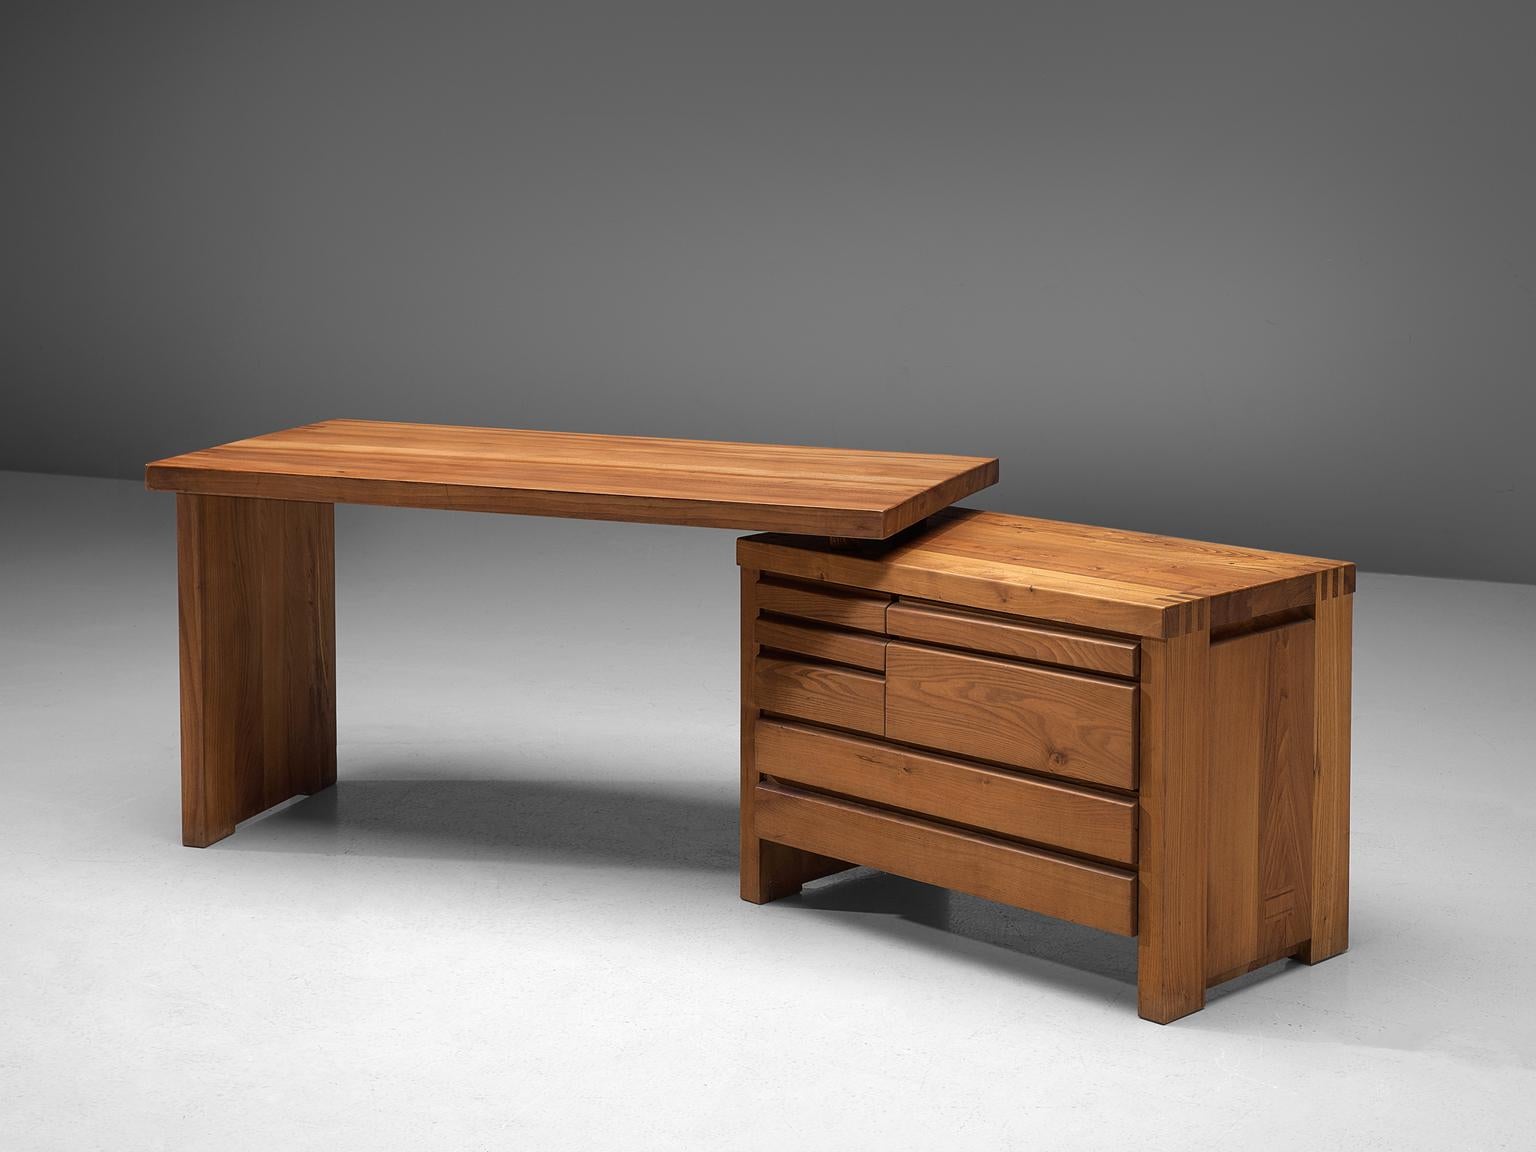 Pierre Chapo, desk model B19, elm, France, 1960s. 

Executive desk in elmwood. The simplicity of this design is it's strength. The quality of the elmwood structure is sublime, it's kept together with beautifully made wooden joints. The desk